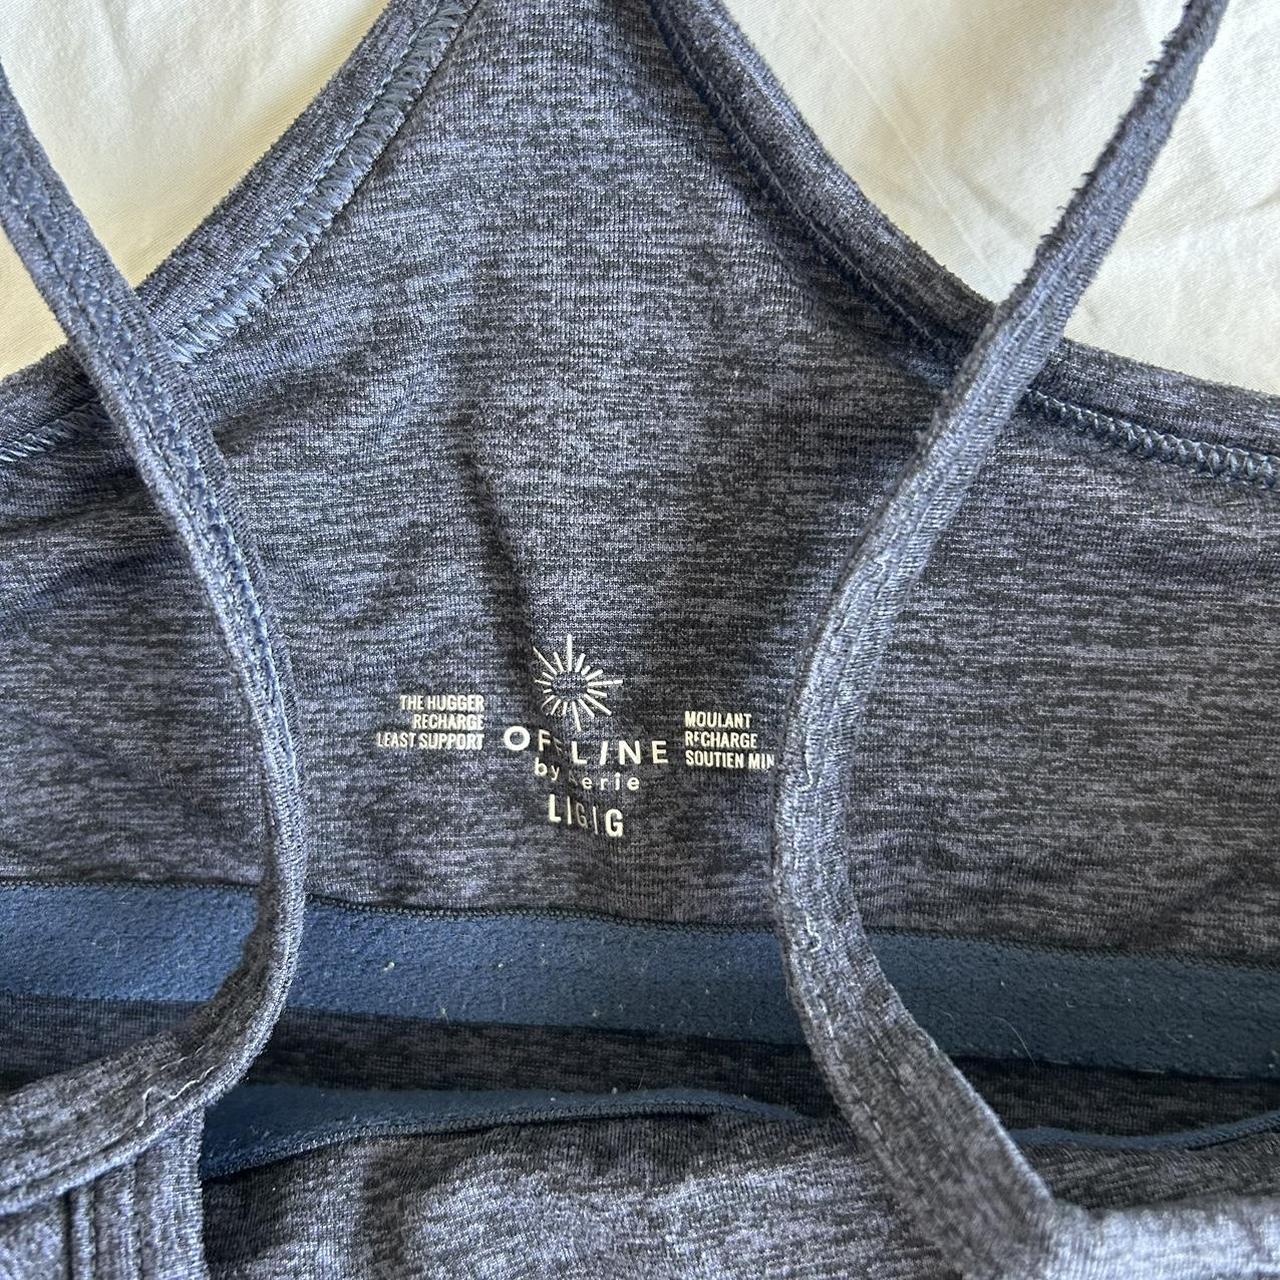 Aerie workout tank * navy blue offline cropped